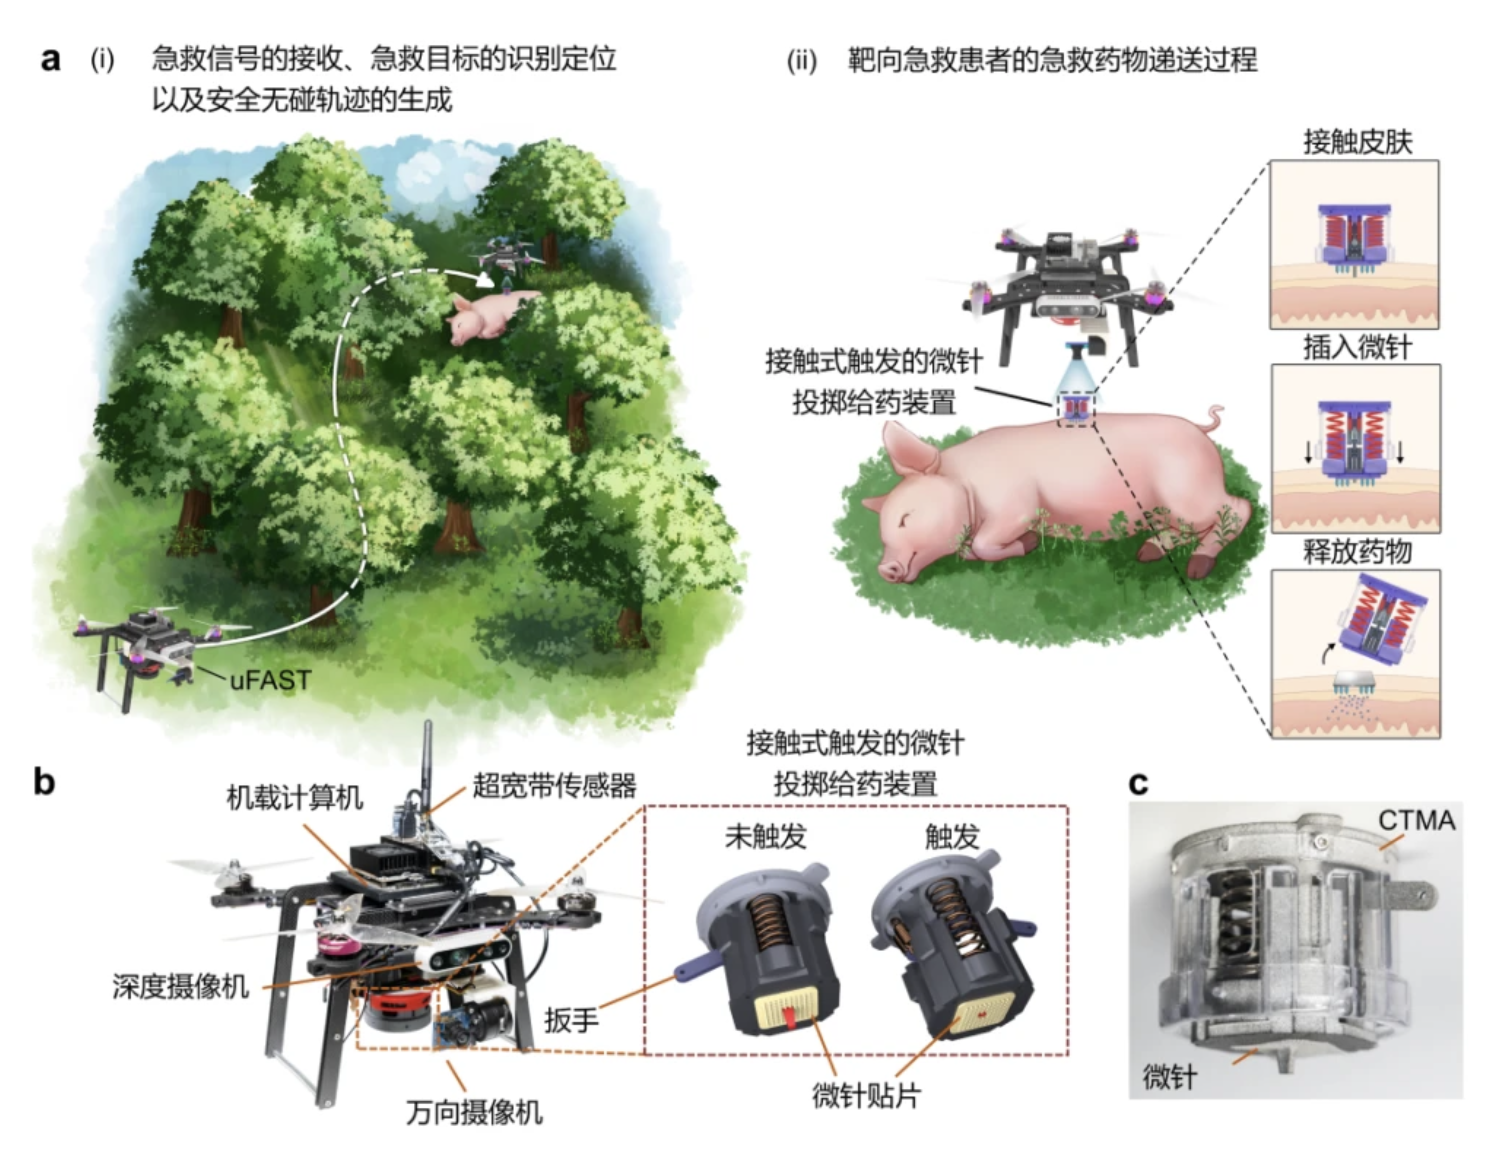 A drone which delivers first-aid medication through a micro-needle patch – animal experiments